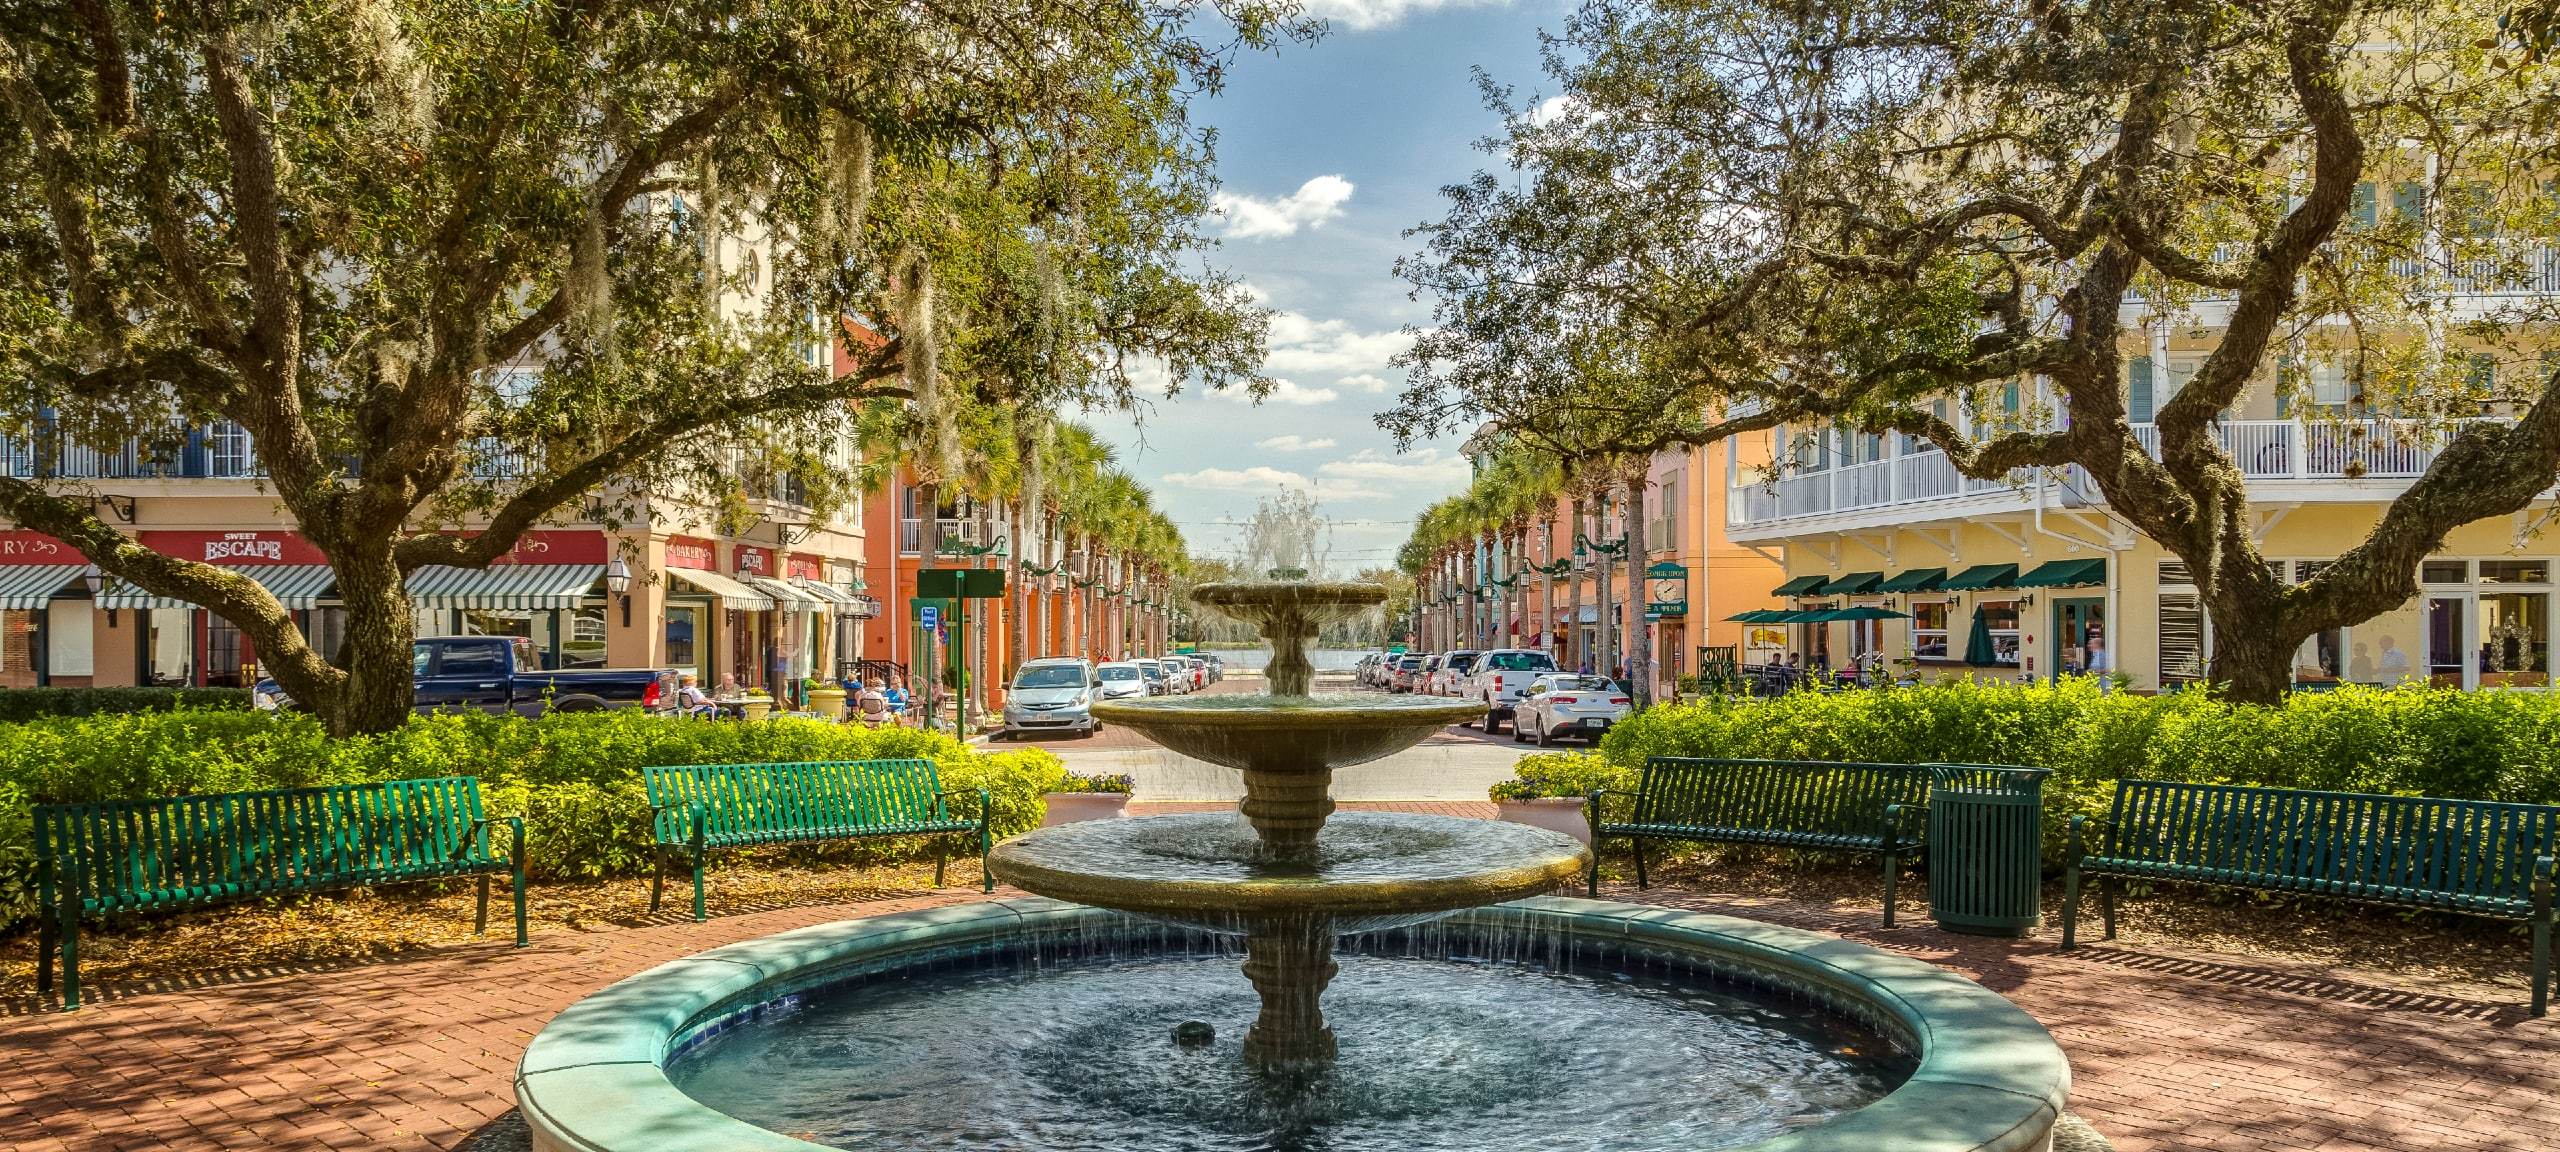 Fountain on Water Street in central Celebration, Florida